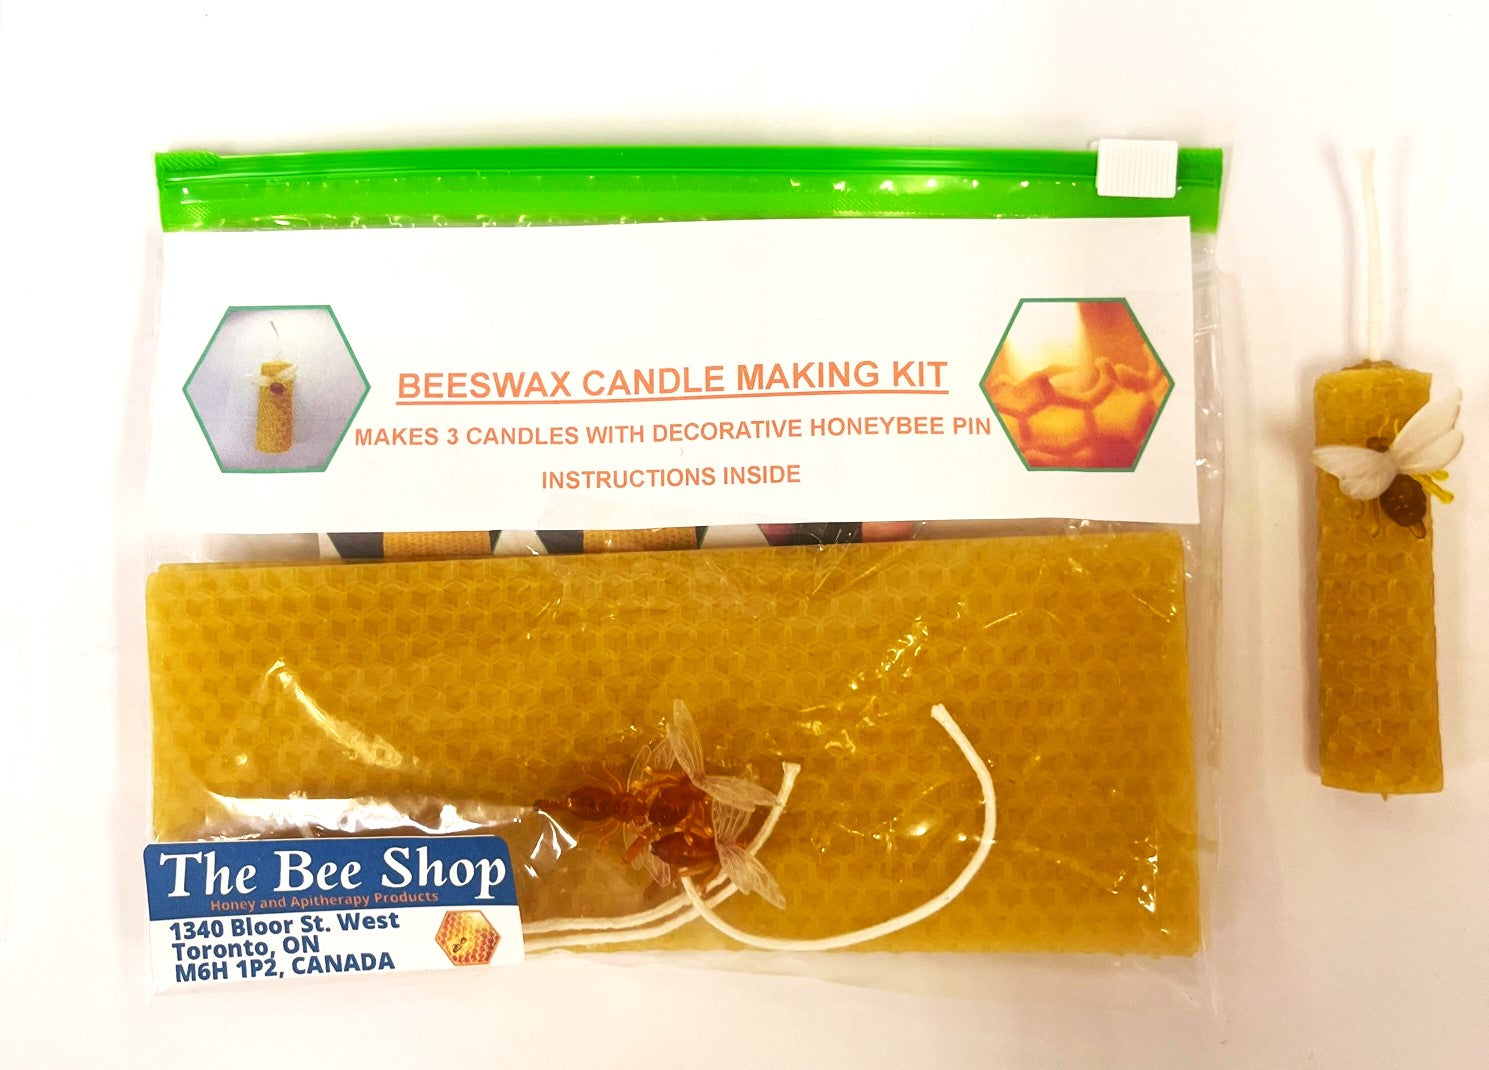 Beeswax candle making kit by The Bee Shop front view